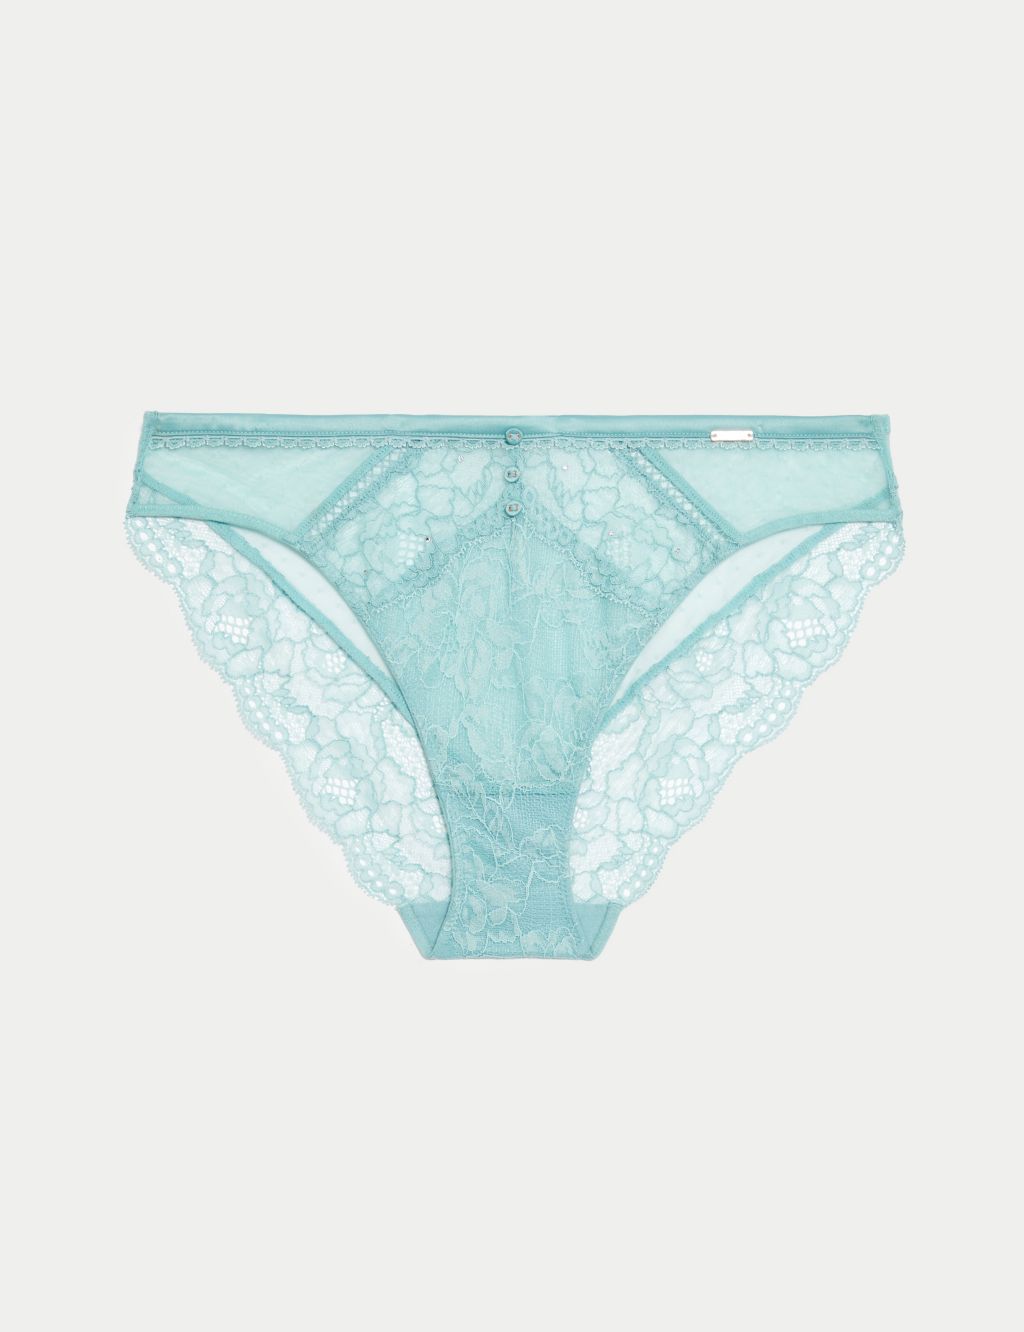 Aster Sparkle Lace High Leg Knickers image 2